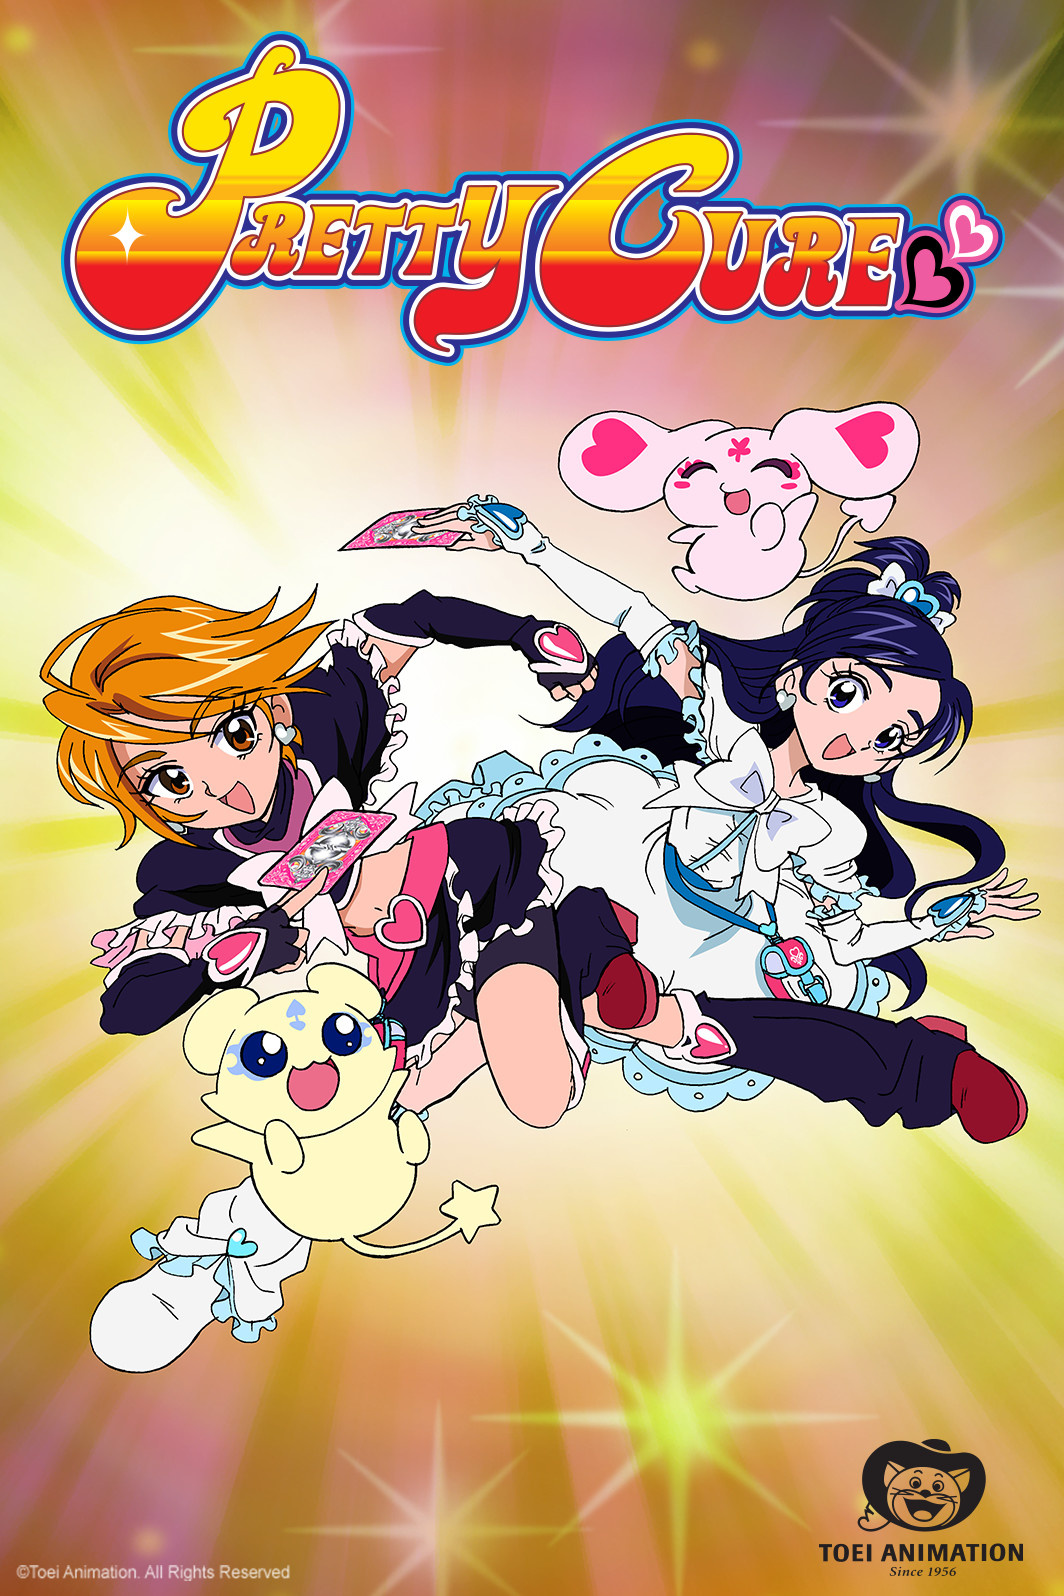 Crunchyroll - Pretty Cure Anime Expands to Europe and MENA Regions on